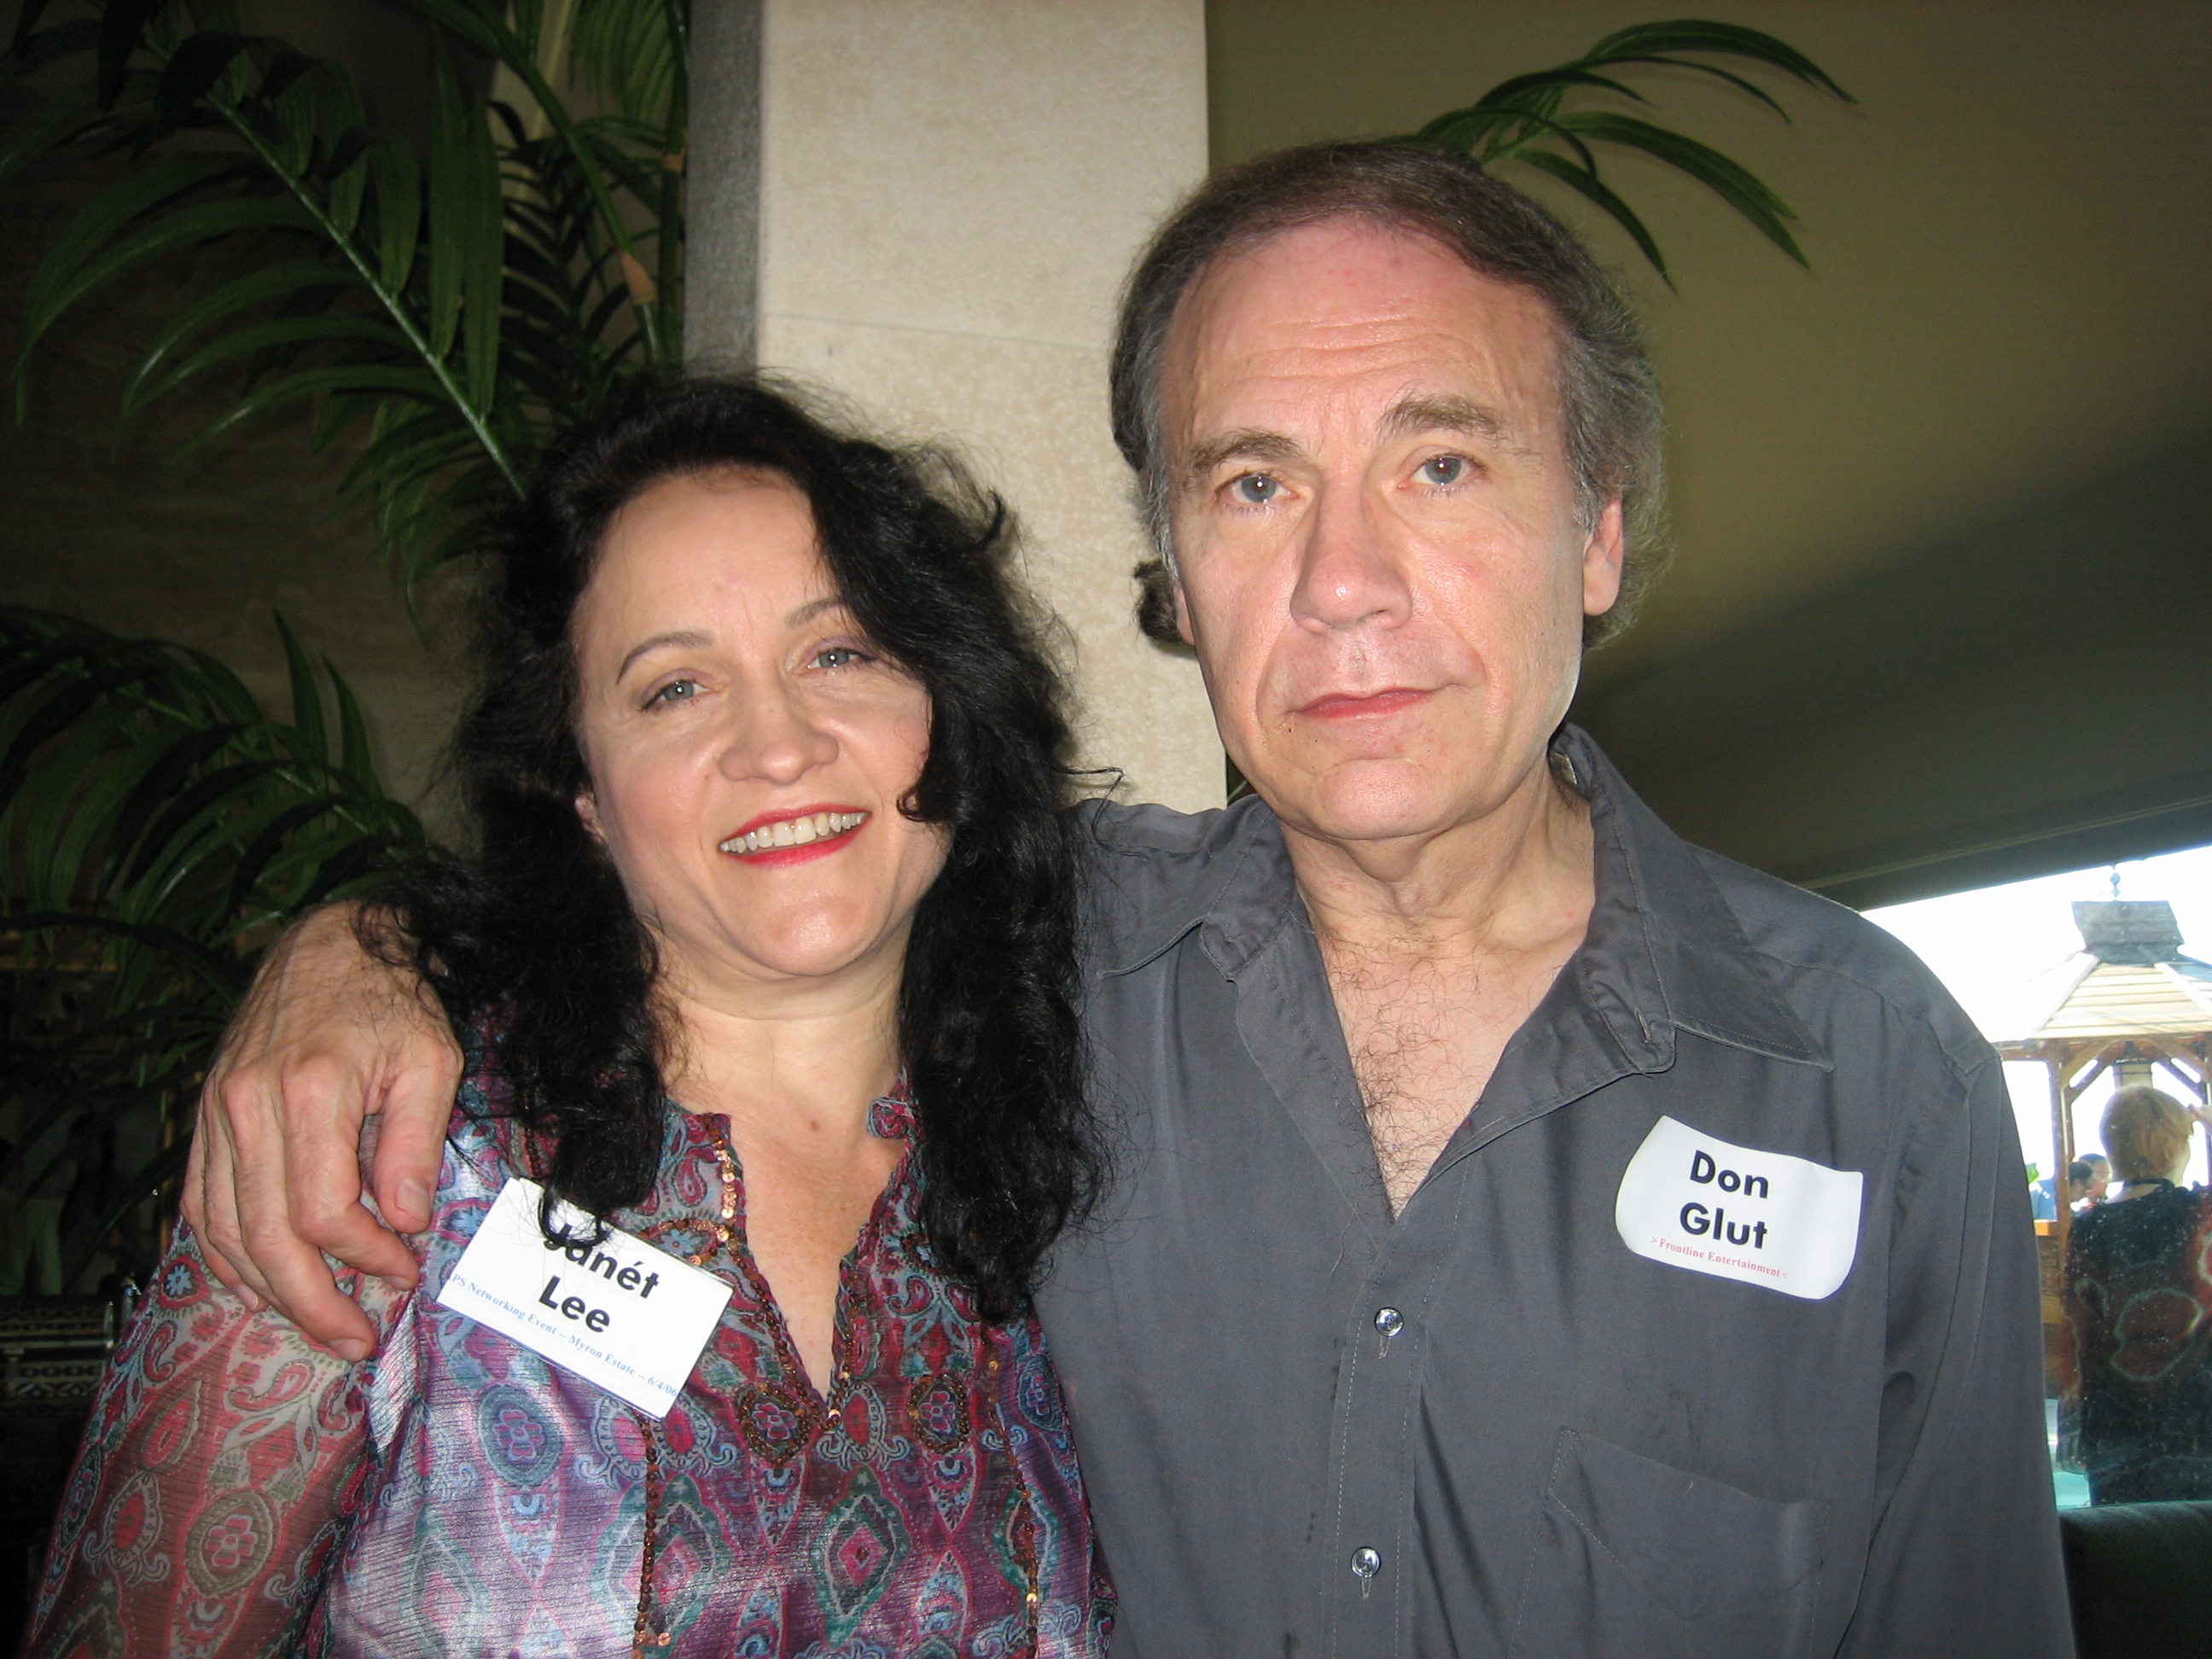 with director Don Glut at a networking event, at the Myron Estate in the Hollywood Hills, 2006